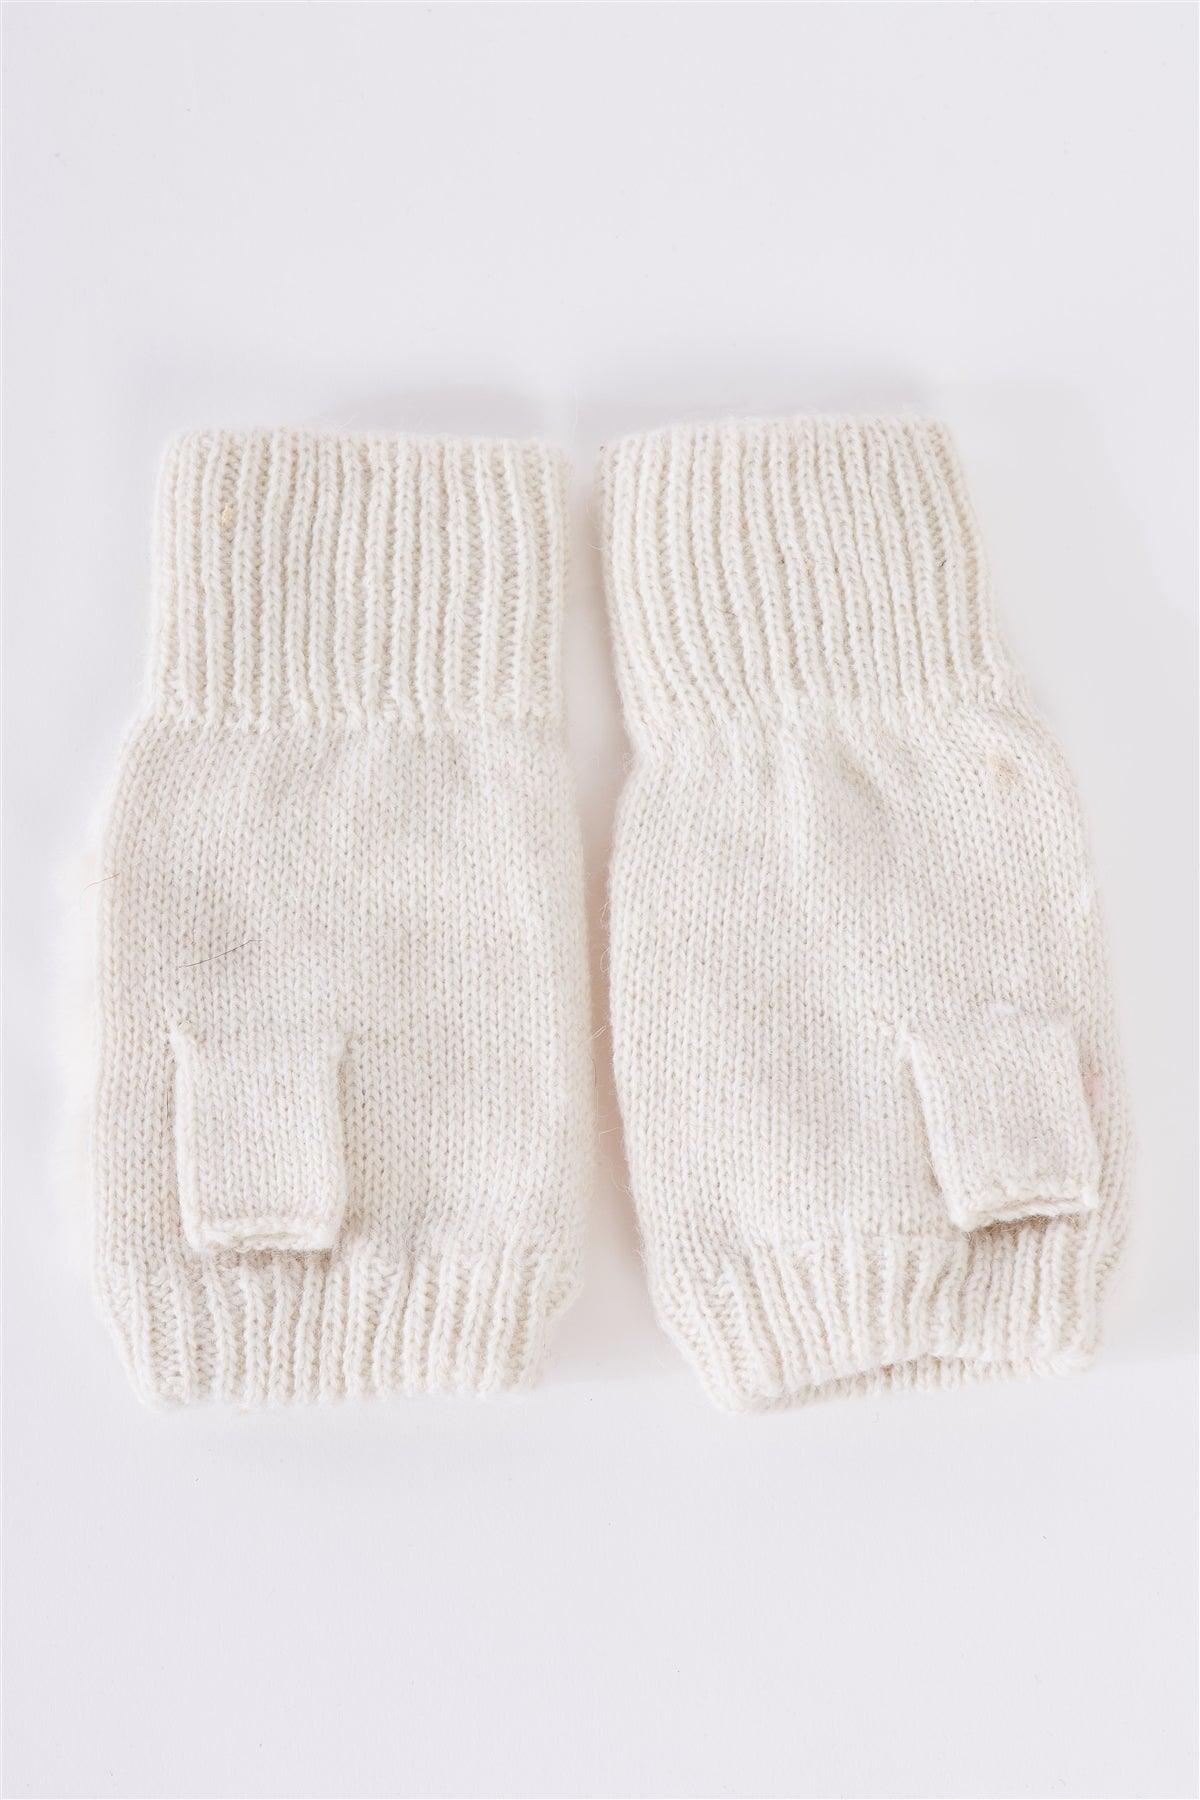 Ivory Knit Furry Fingerless Pearl Detail Winter Gloves /3 Pieces